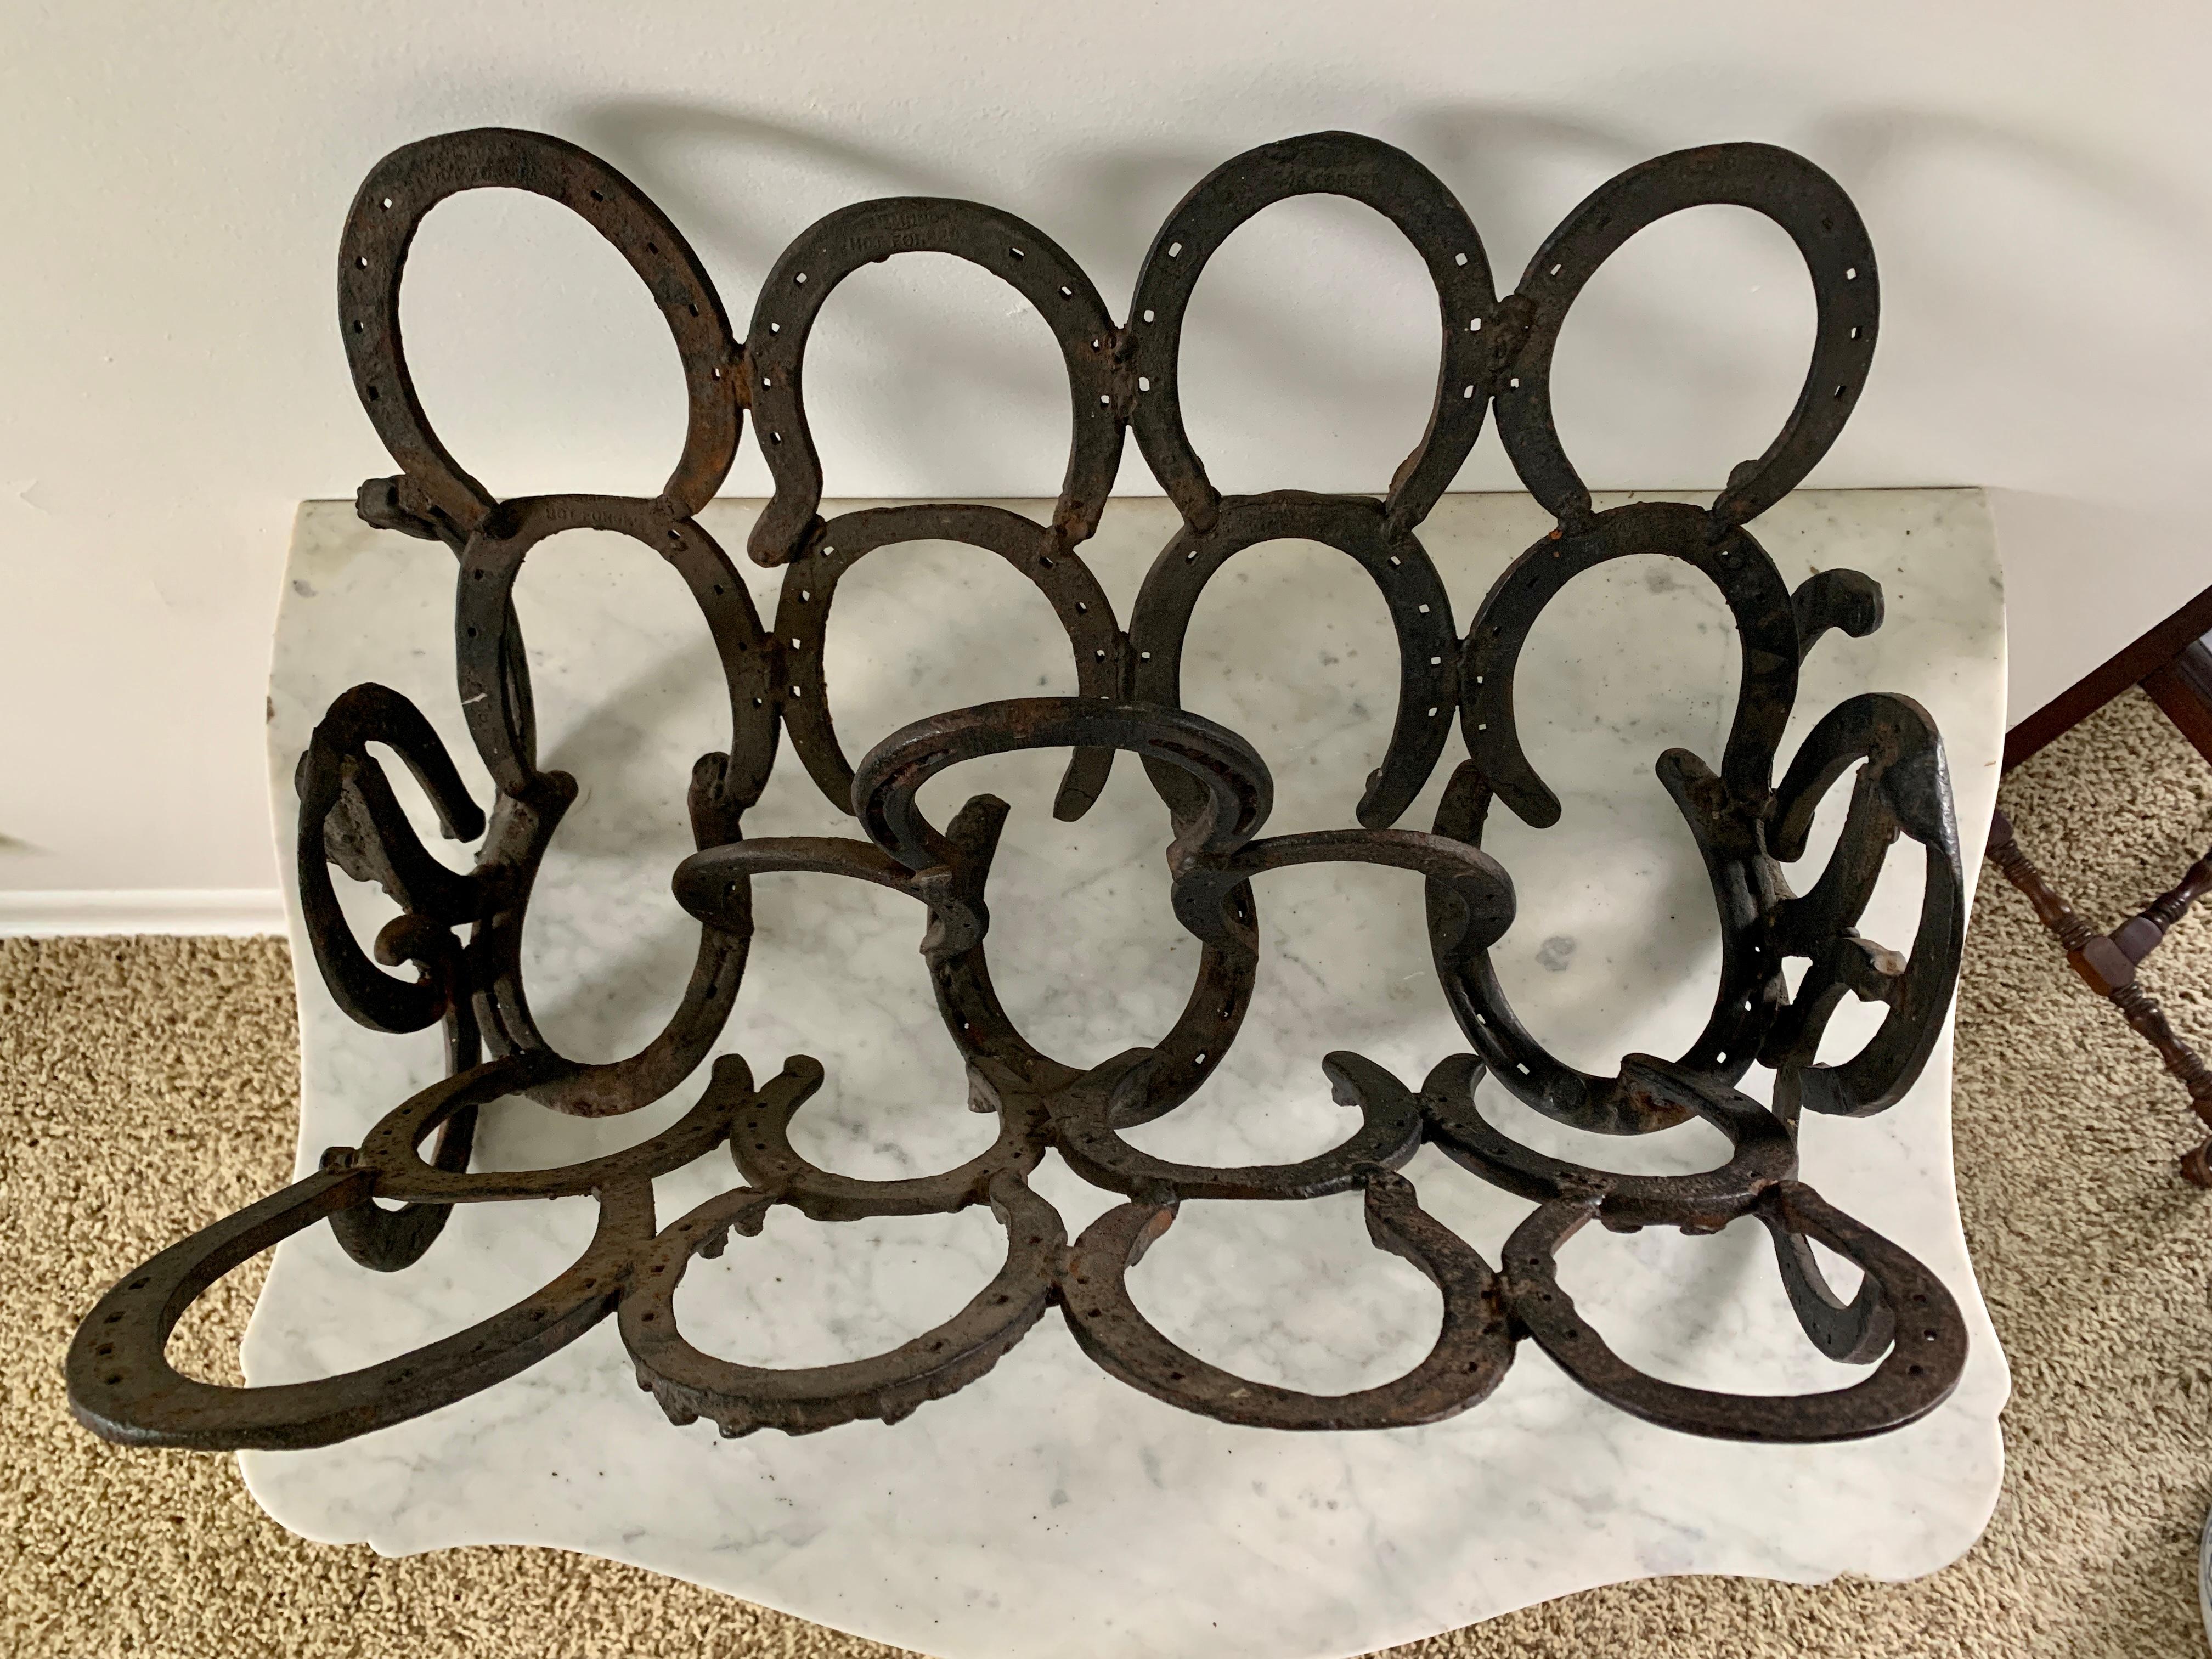 Rustic Vintage Equestrian Hand Forged Cast Iron Horseshoe Magazine Rack or Book Stand For Sale